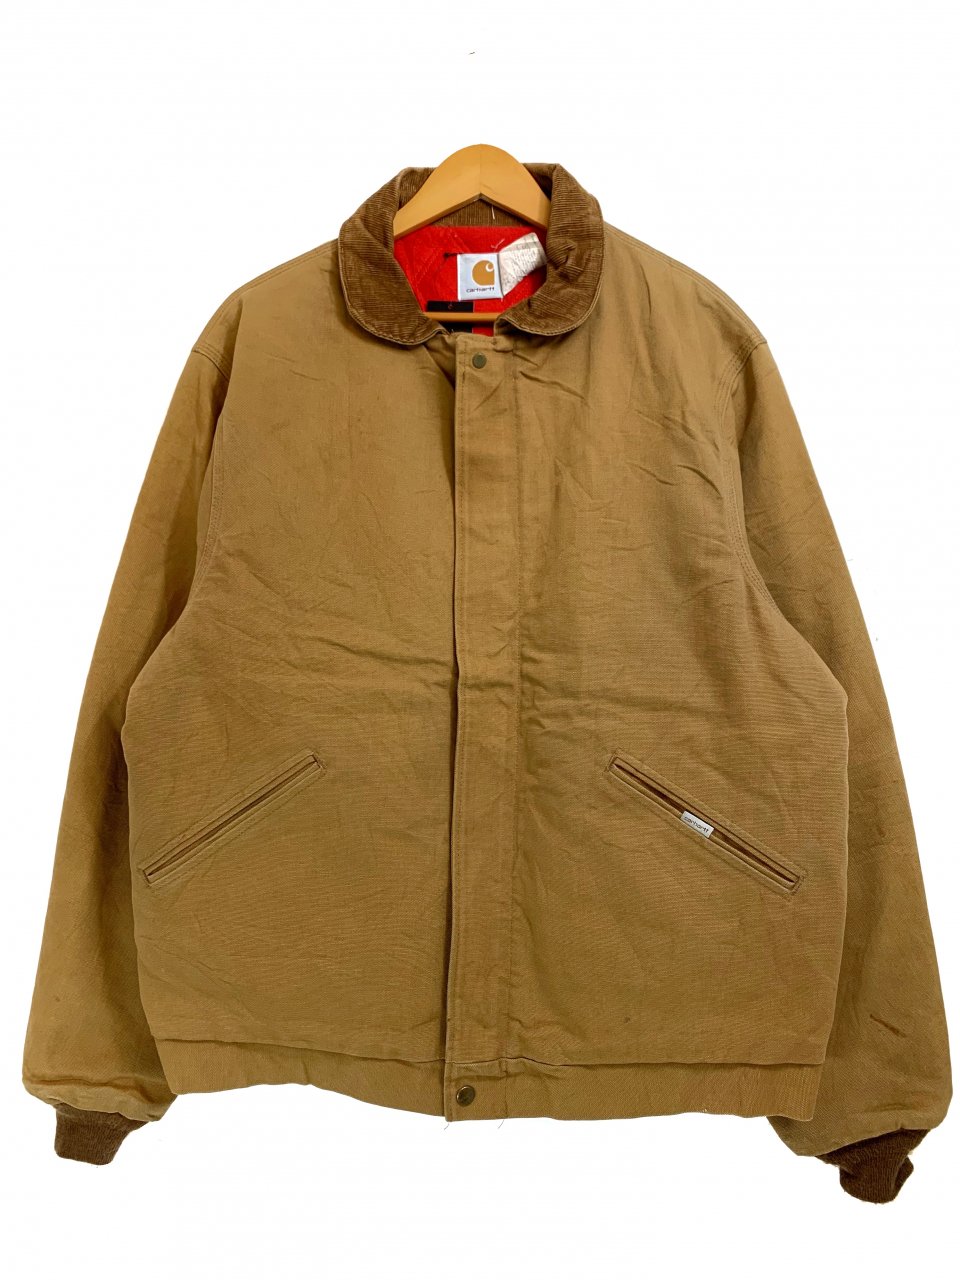 USA製 80s～90s Carhartt Flannel Lined Duck Jacket 茶 L カーハート ...